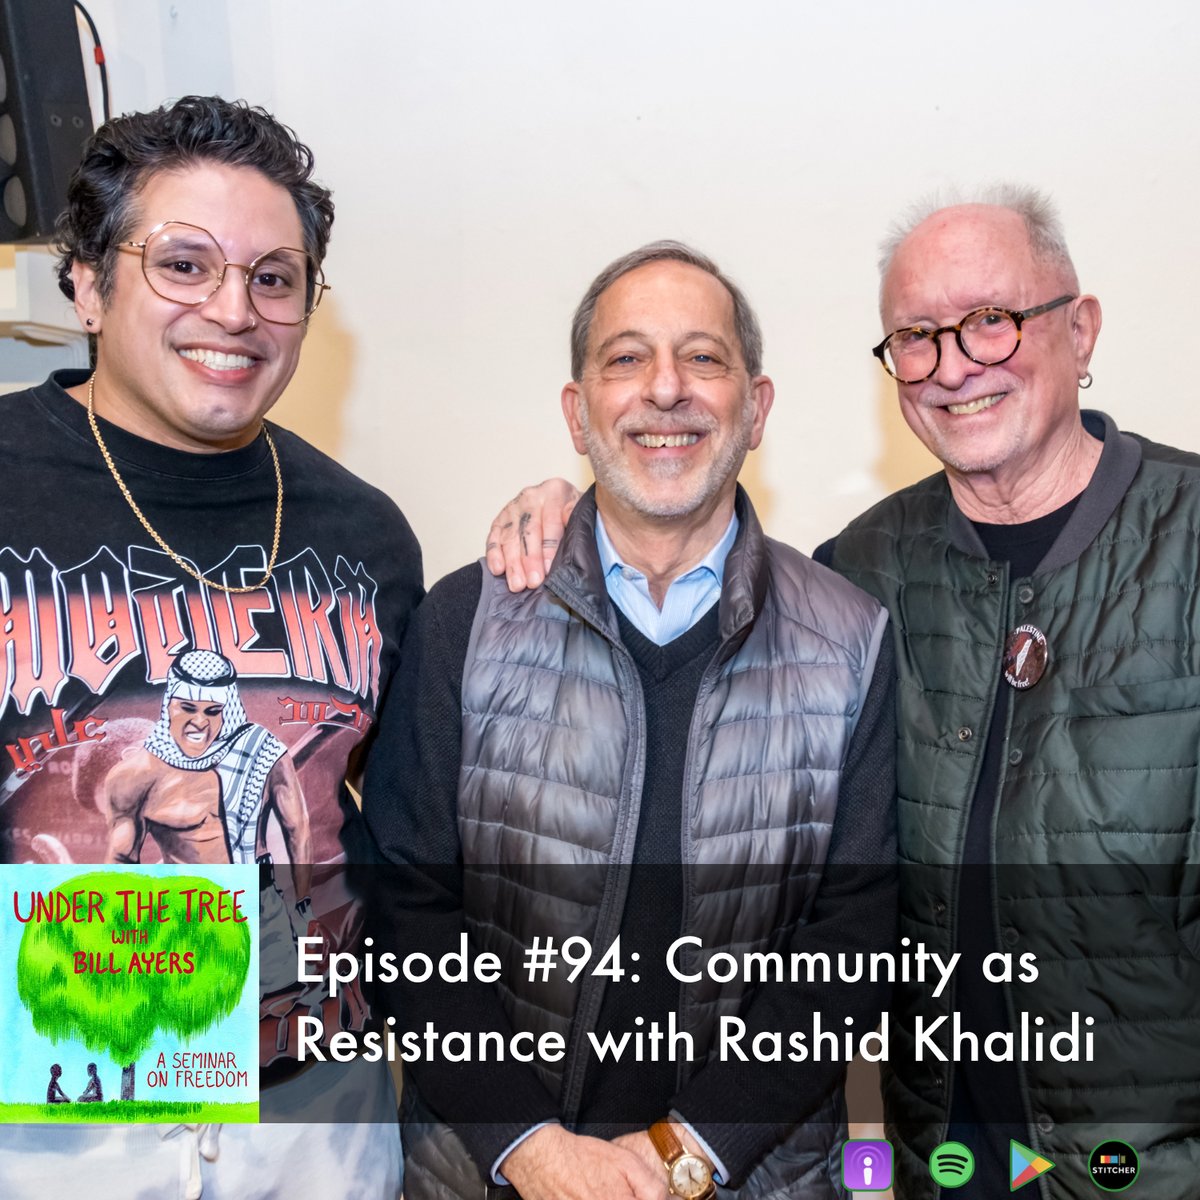 NEW Episode #94: Community as Resistance with Rashid Khalidi
We gathered in conversation with Rashid Khalidi, THE historian of the Palestinian national struggle, and with activists Ricardo Gamboa of the Hoodoisie & Latinxs for Palestine. Listen now!
bit.ly/48Ewl5X